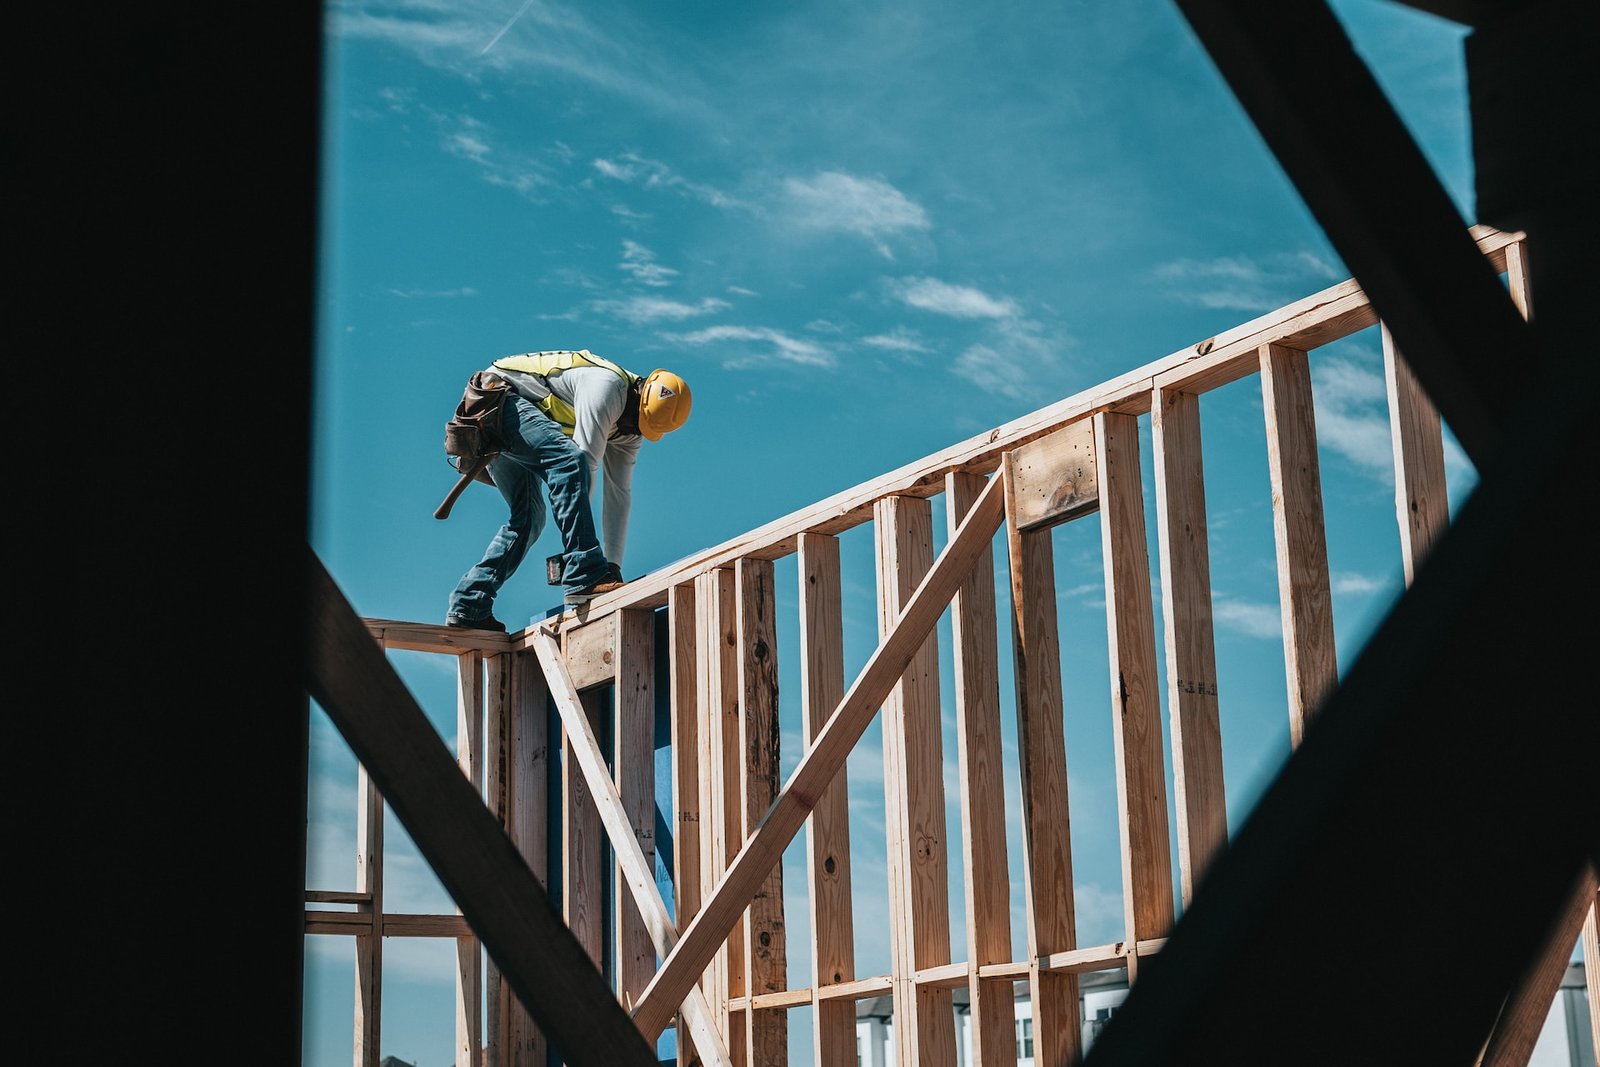 Construction worker on top of wooden structure working